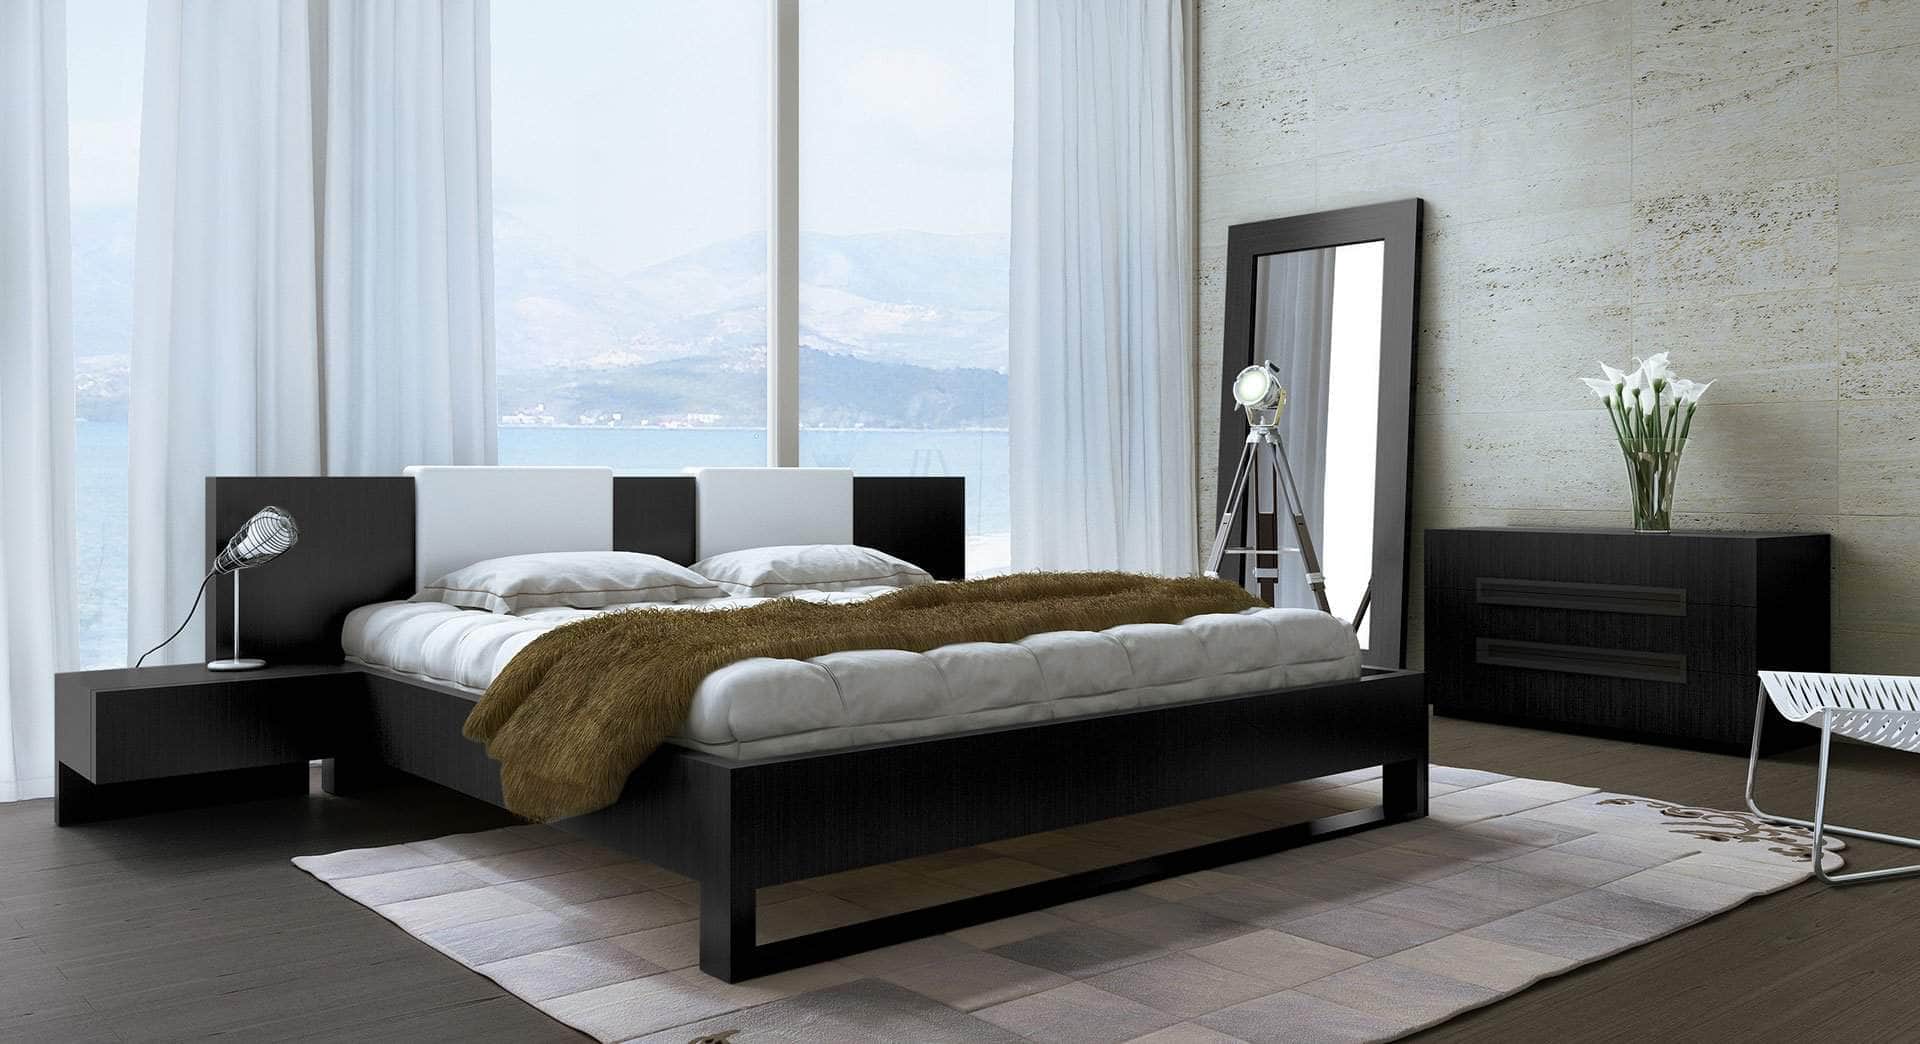 Modloft Bed Monroe Eco Pelle Leather Low Profile Platform Bed - Available in 3 Colours and 2 Sizes